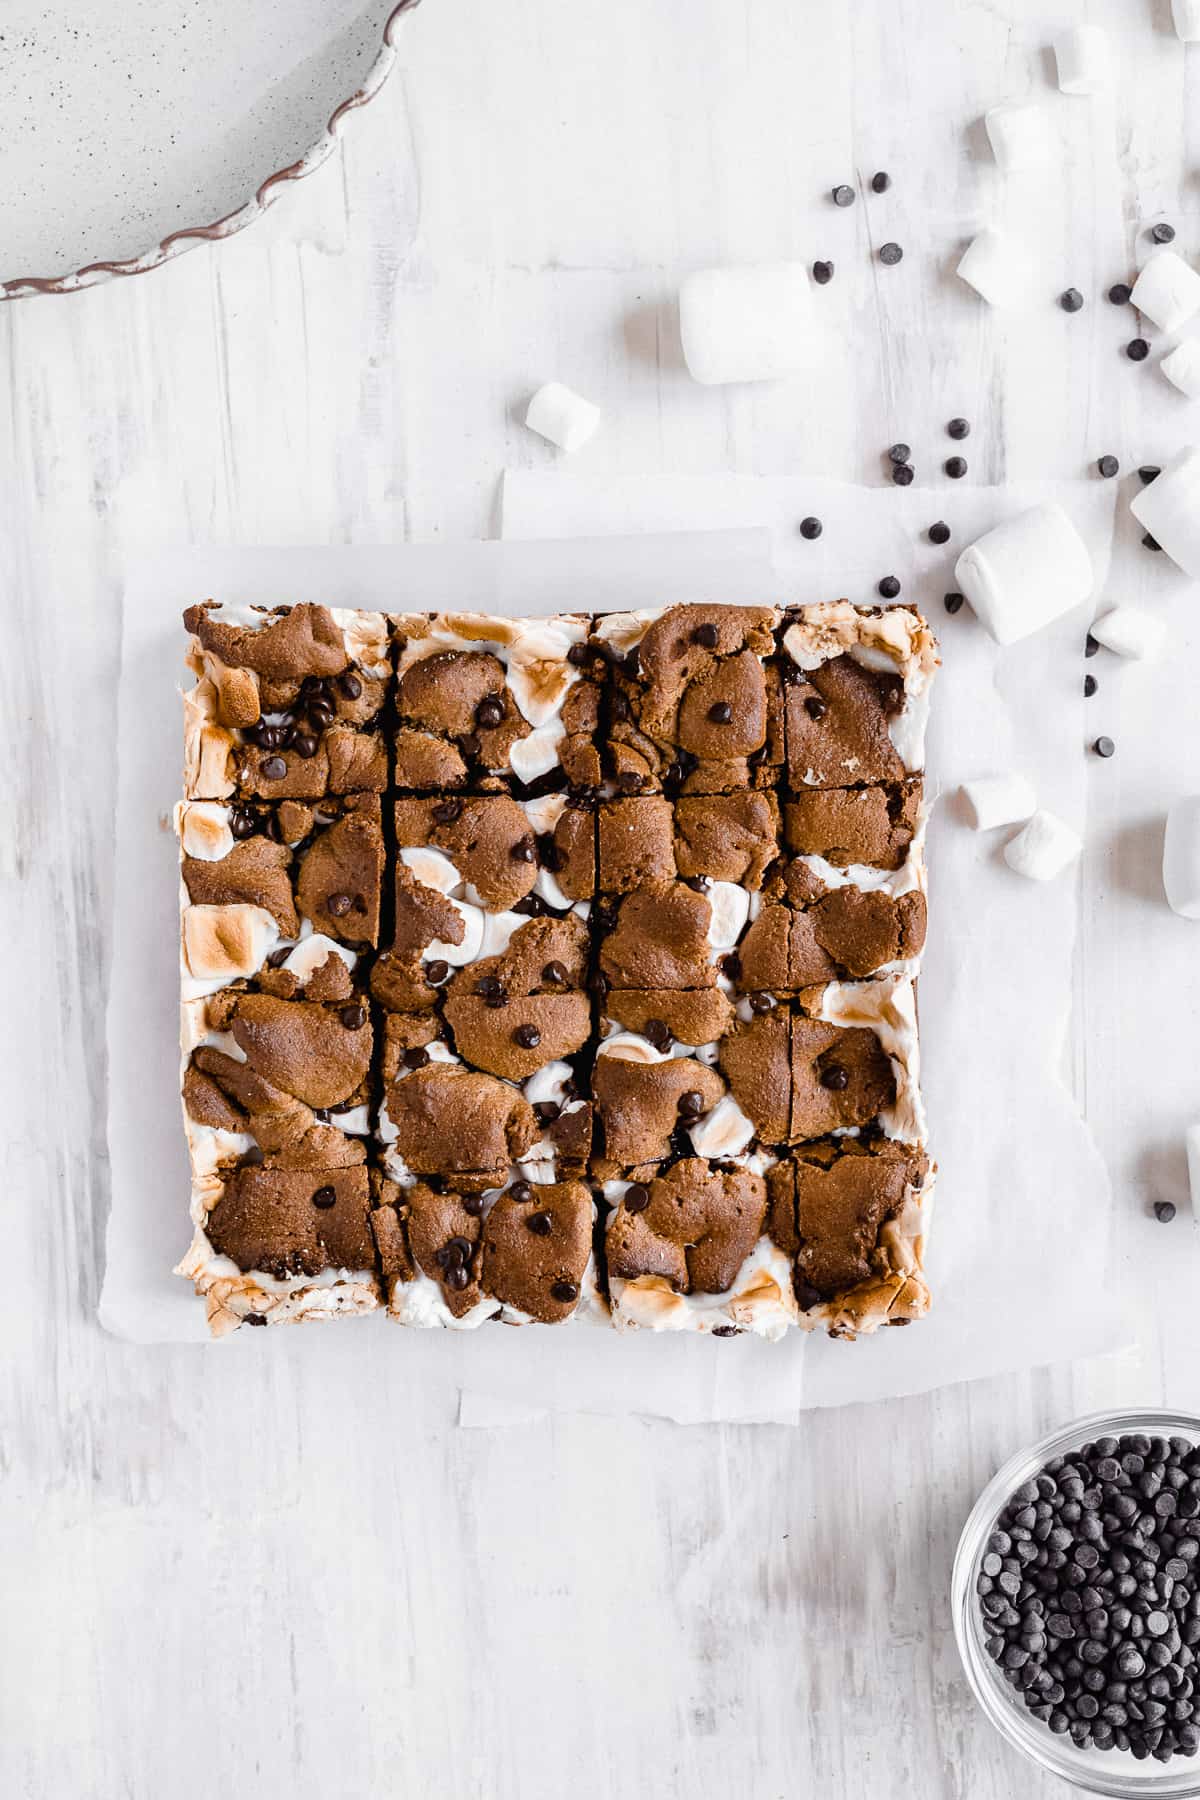 Baked s'more bars on a white sheet sliced into squares.